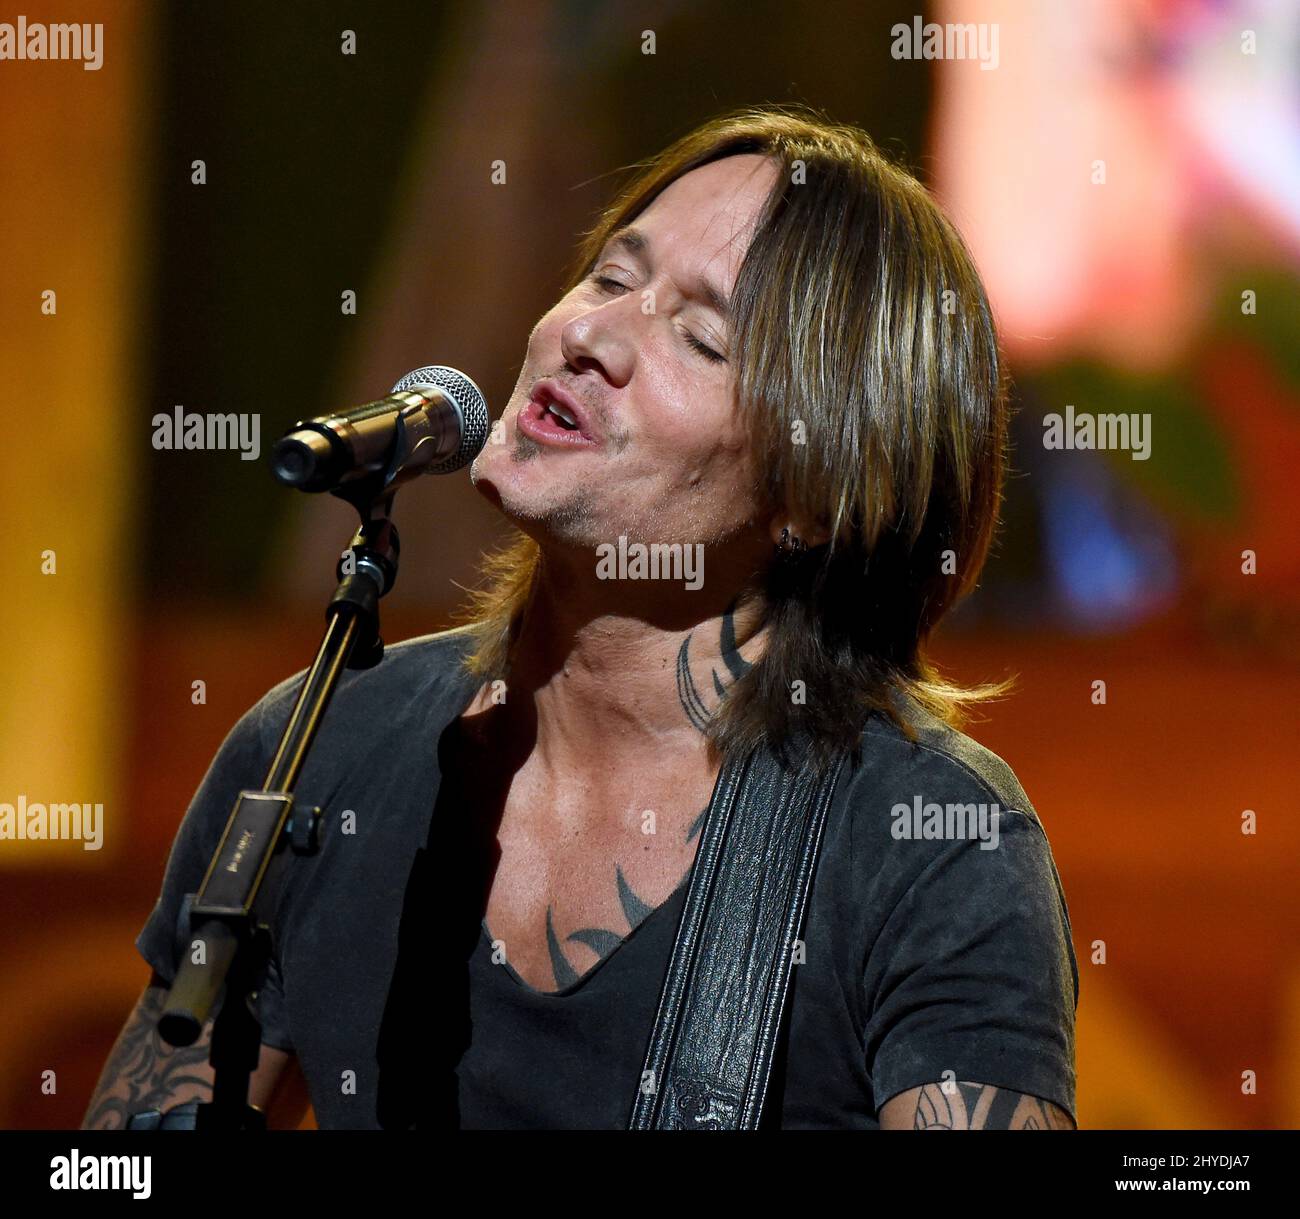 Keith Urban during Tuesday night performances at the Grand Ole Opry Stock Photo